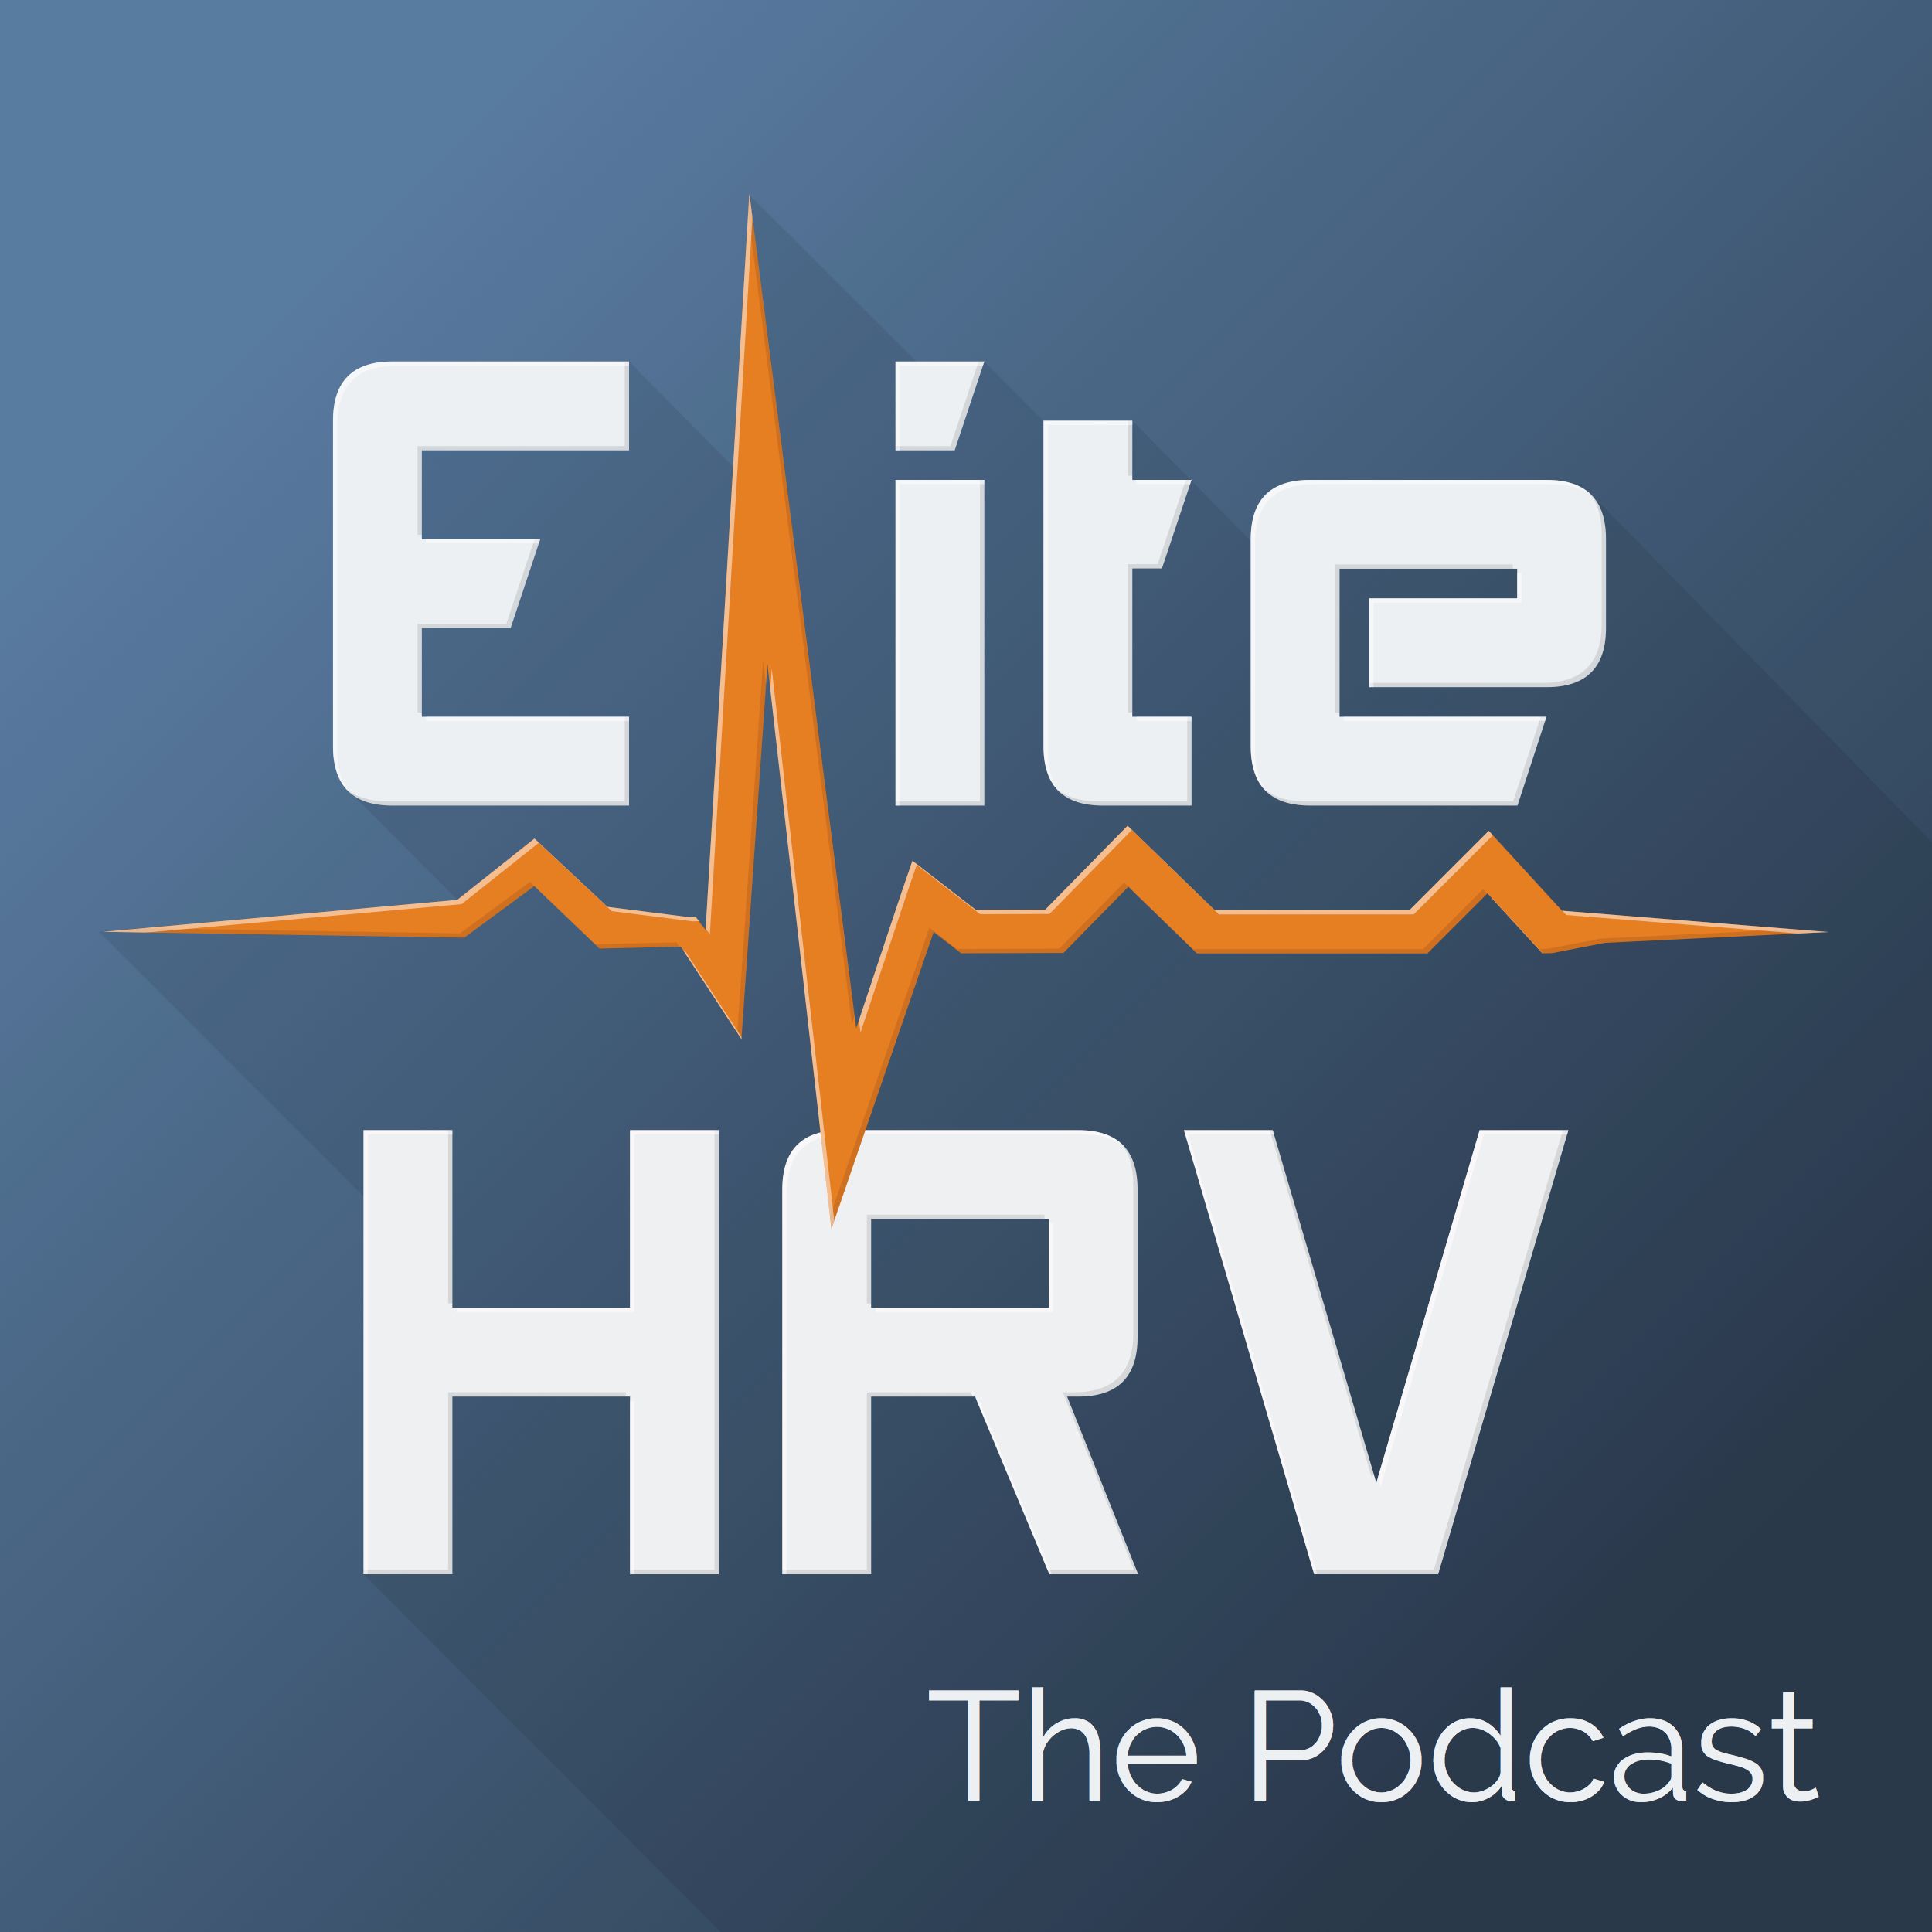 The Elite HRV Podcast: Heart Rate Variability, Biohacking Health & Performance, Quantified Self